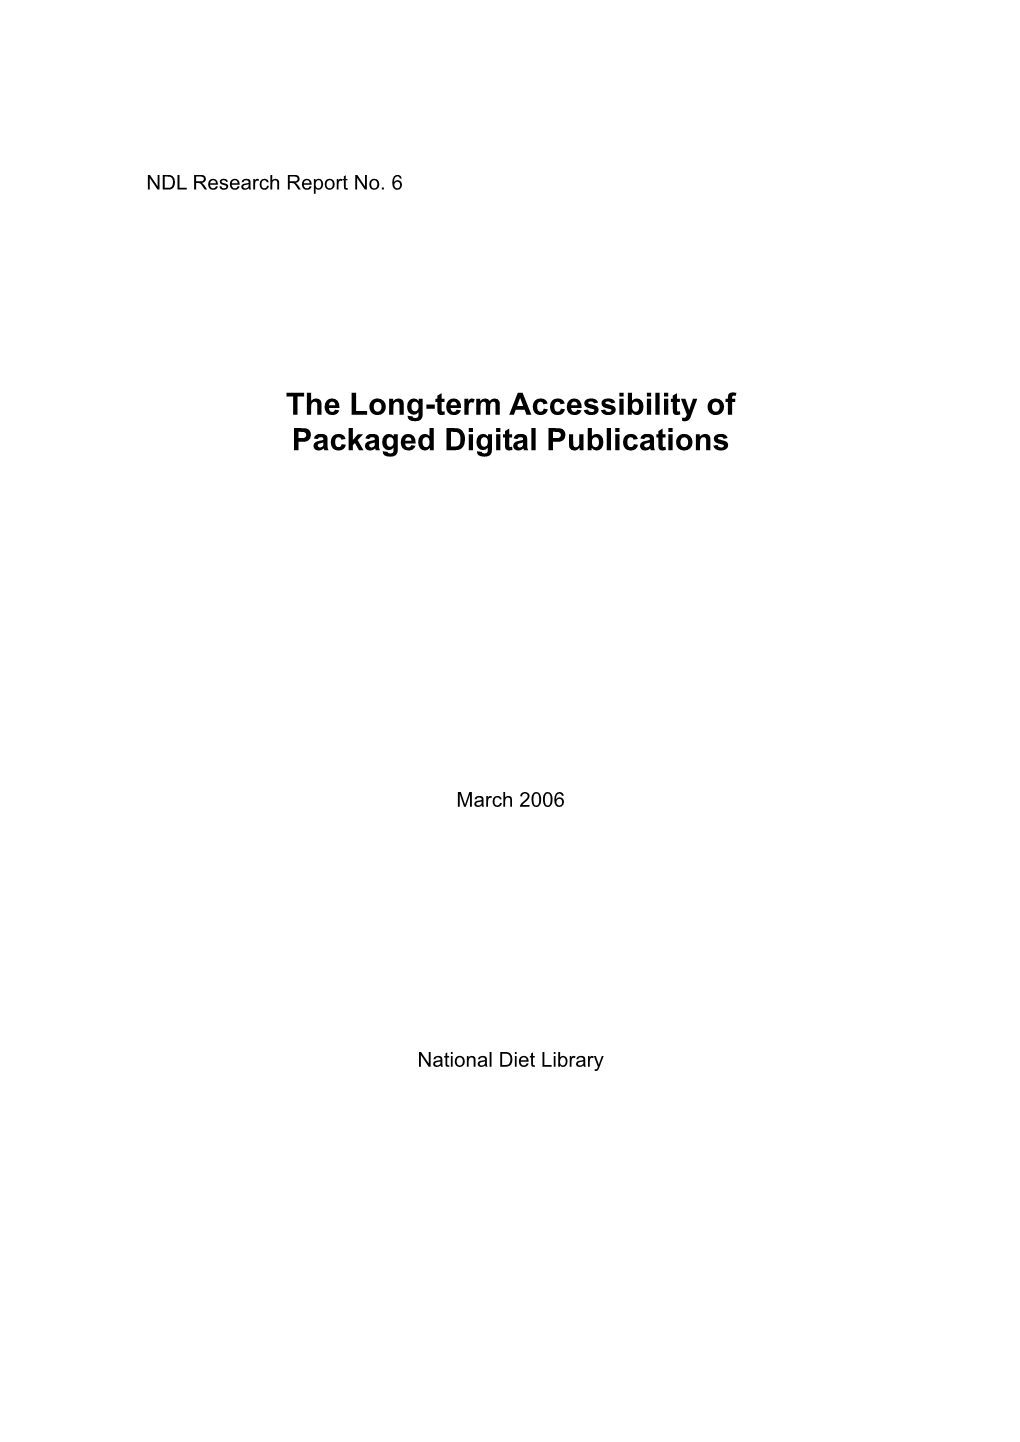 The Long-Term Accessibility of Packaged Digital Publications